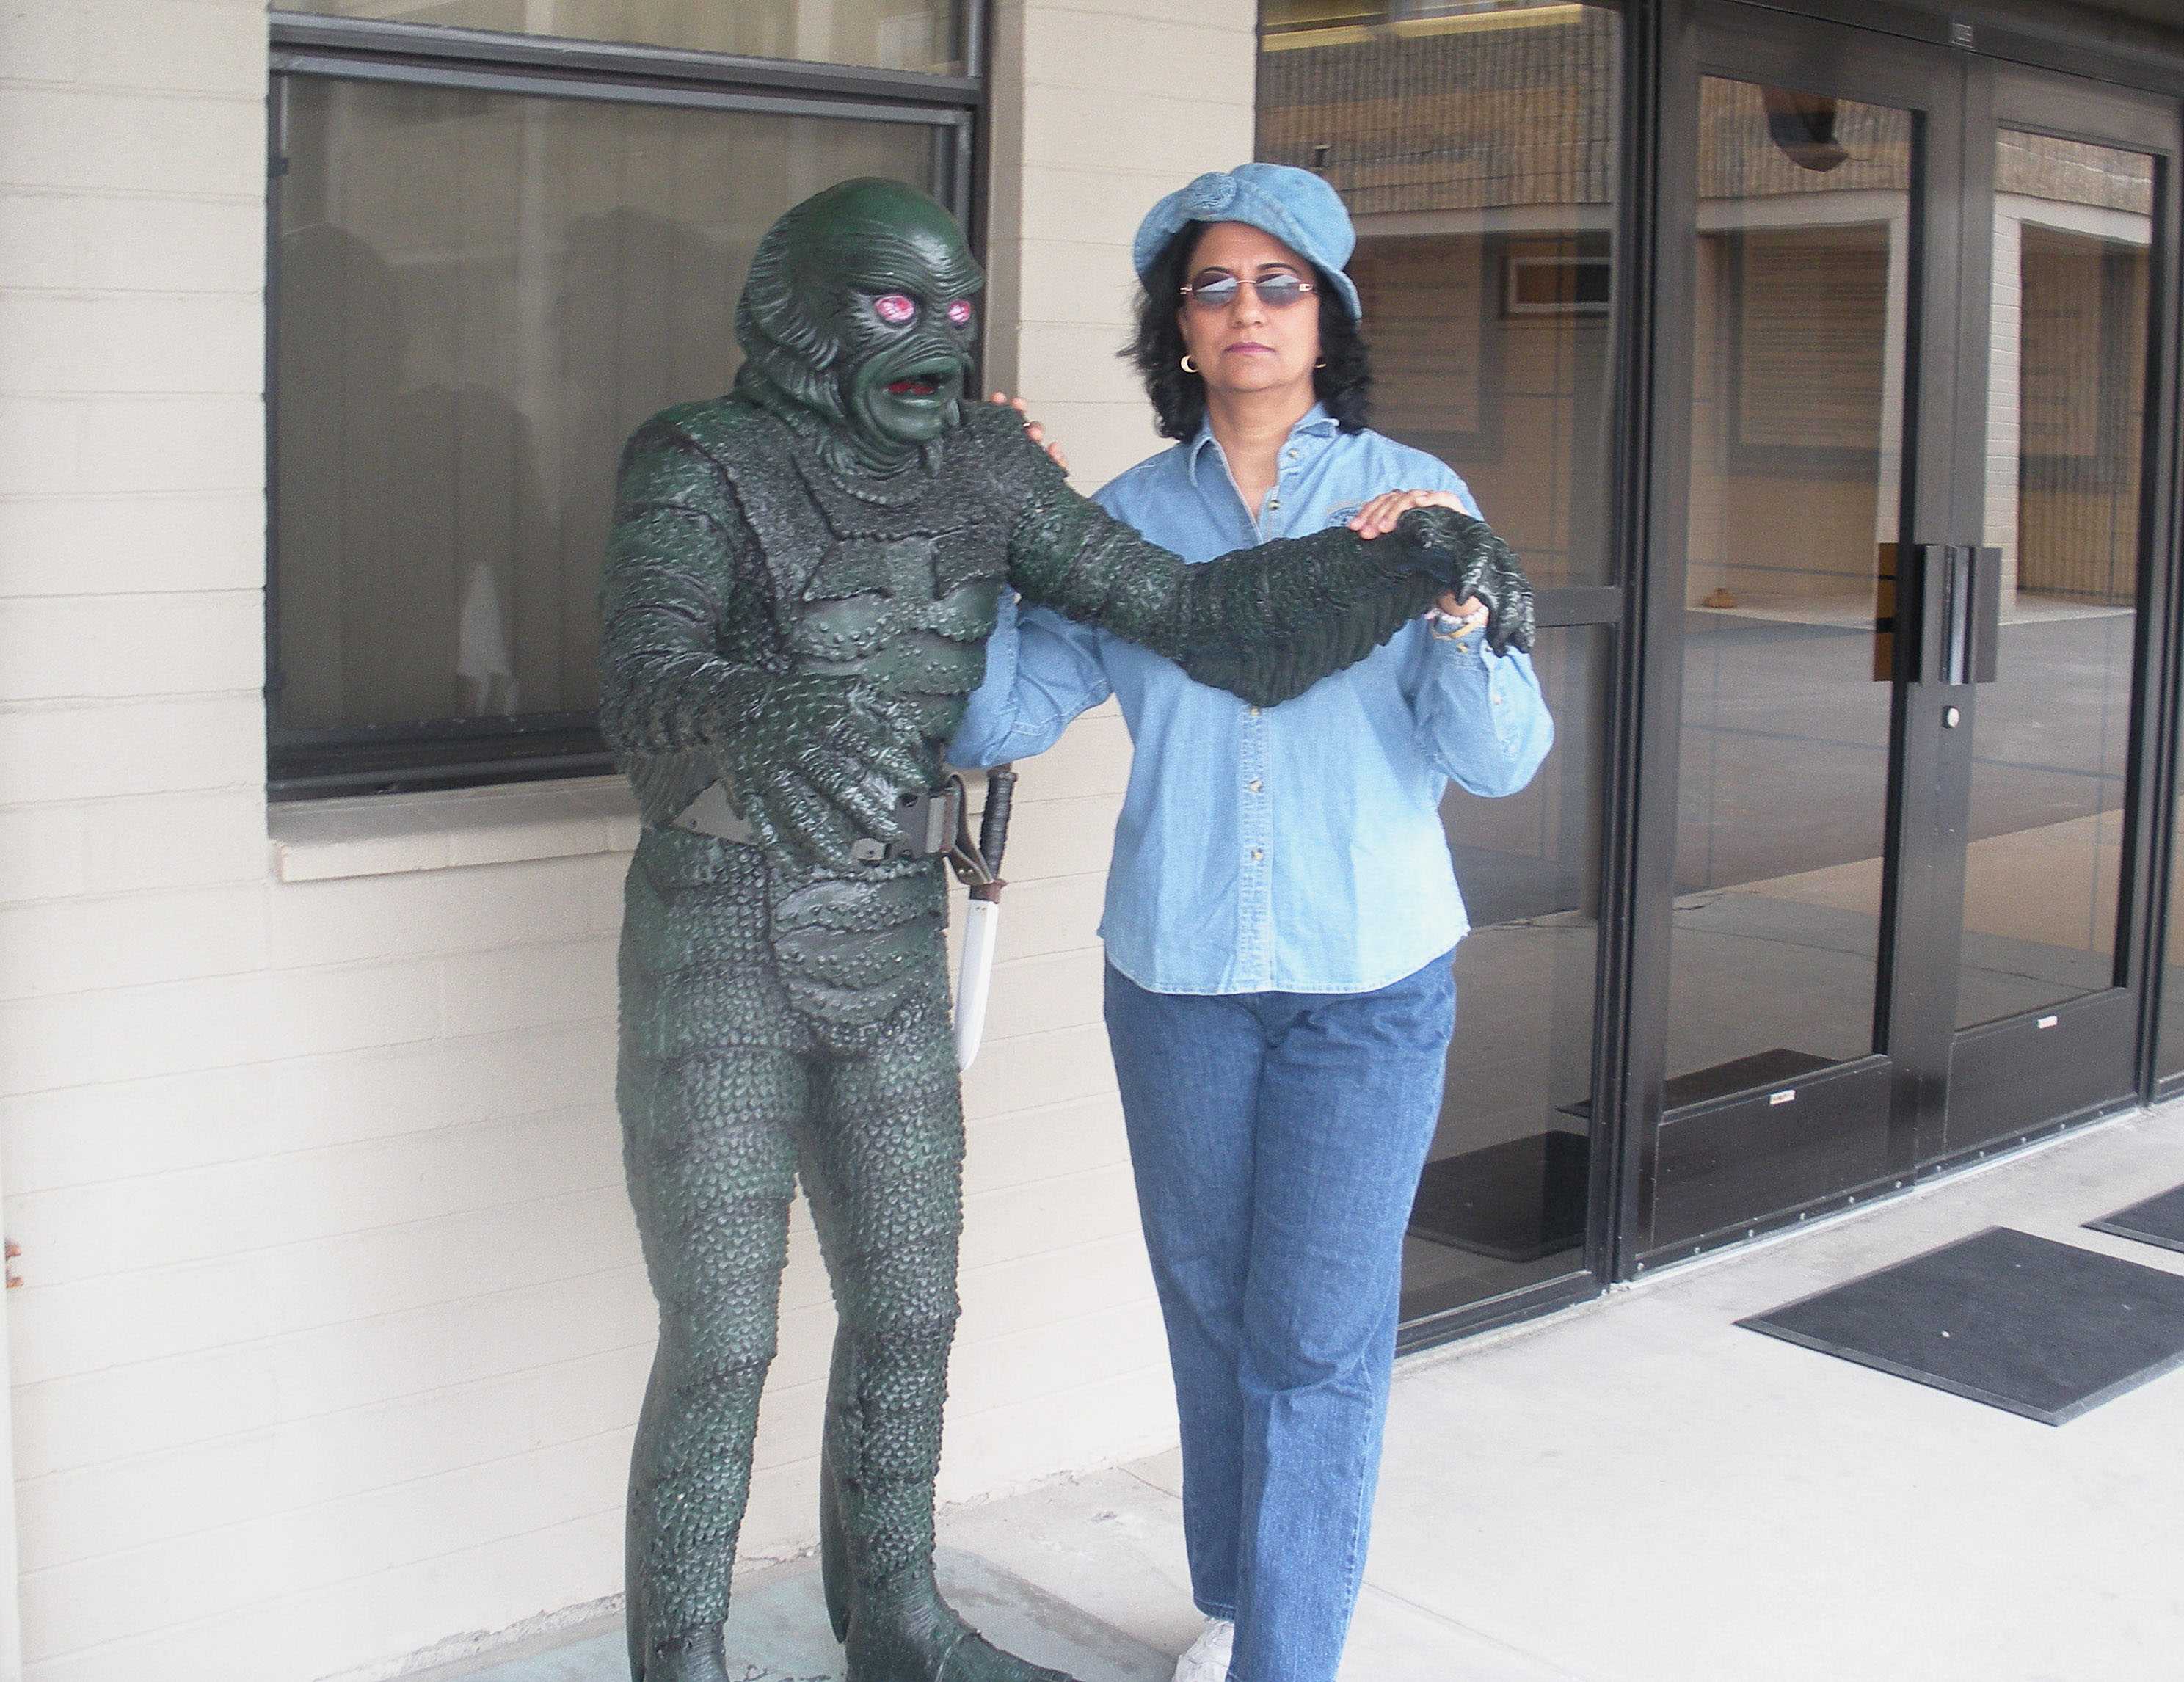 Rashmi Ahuja poses with a statue during one of her many trips.